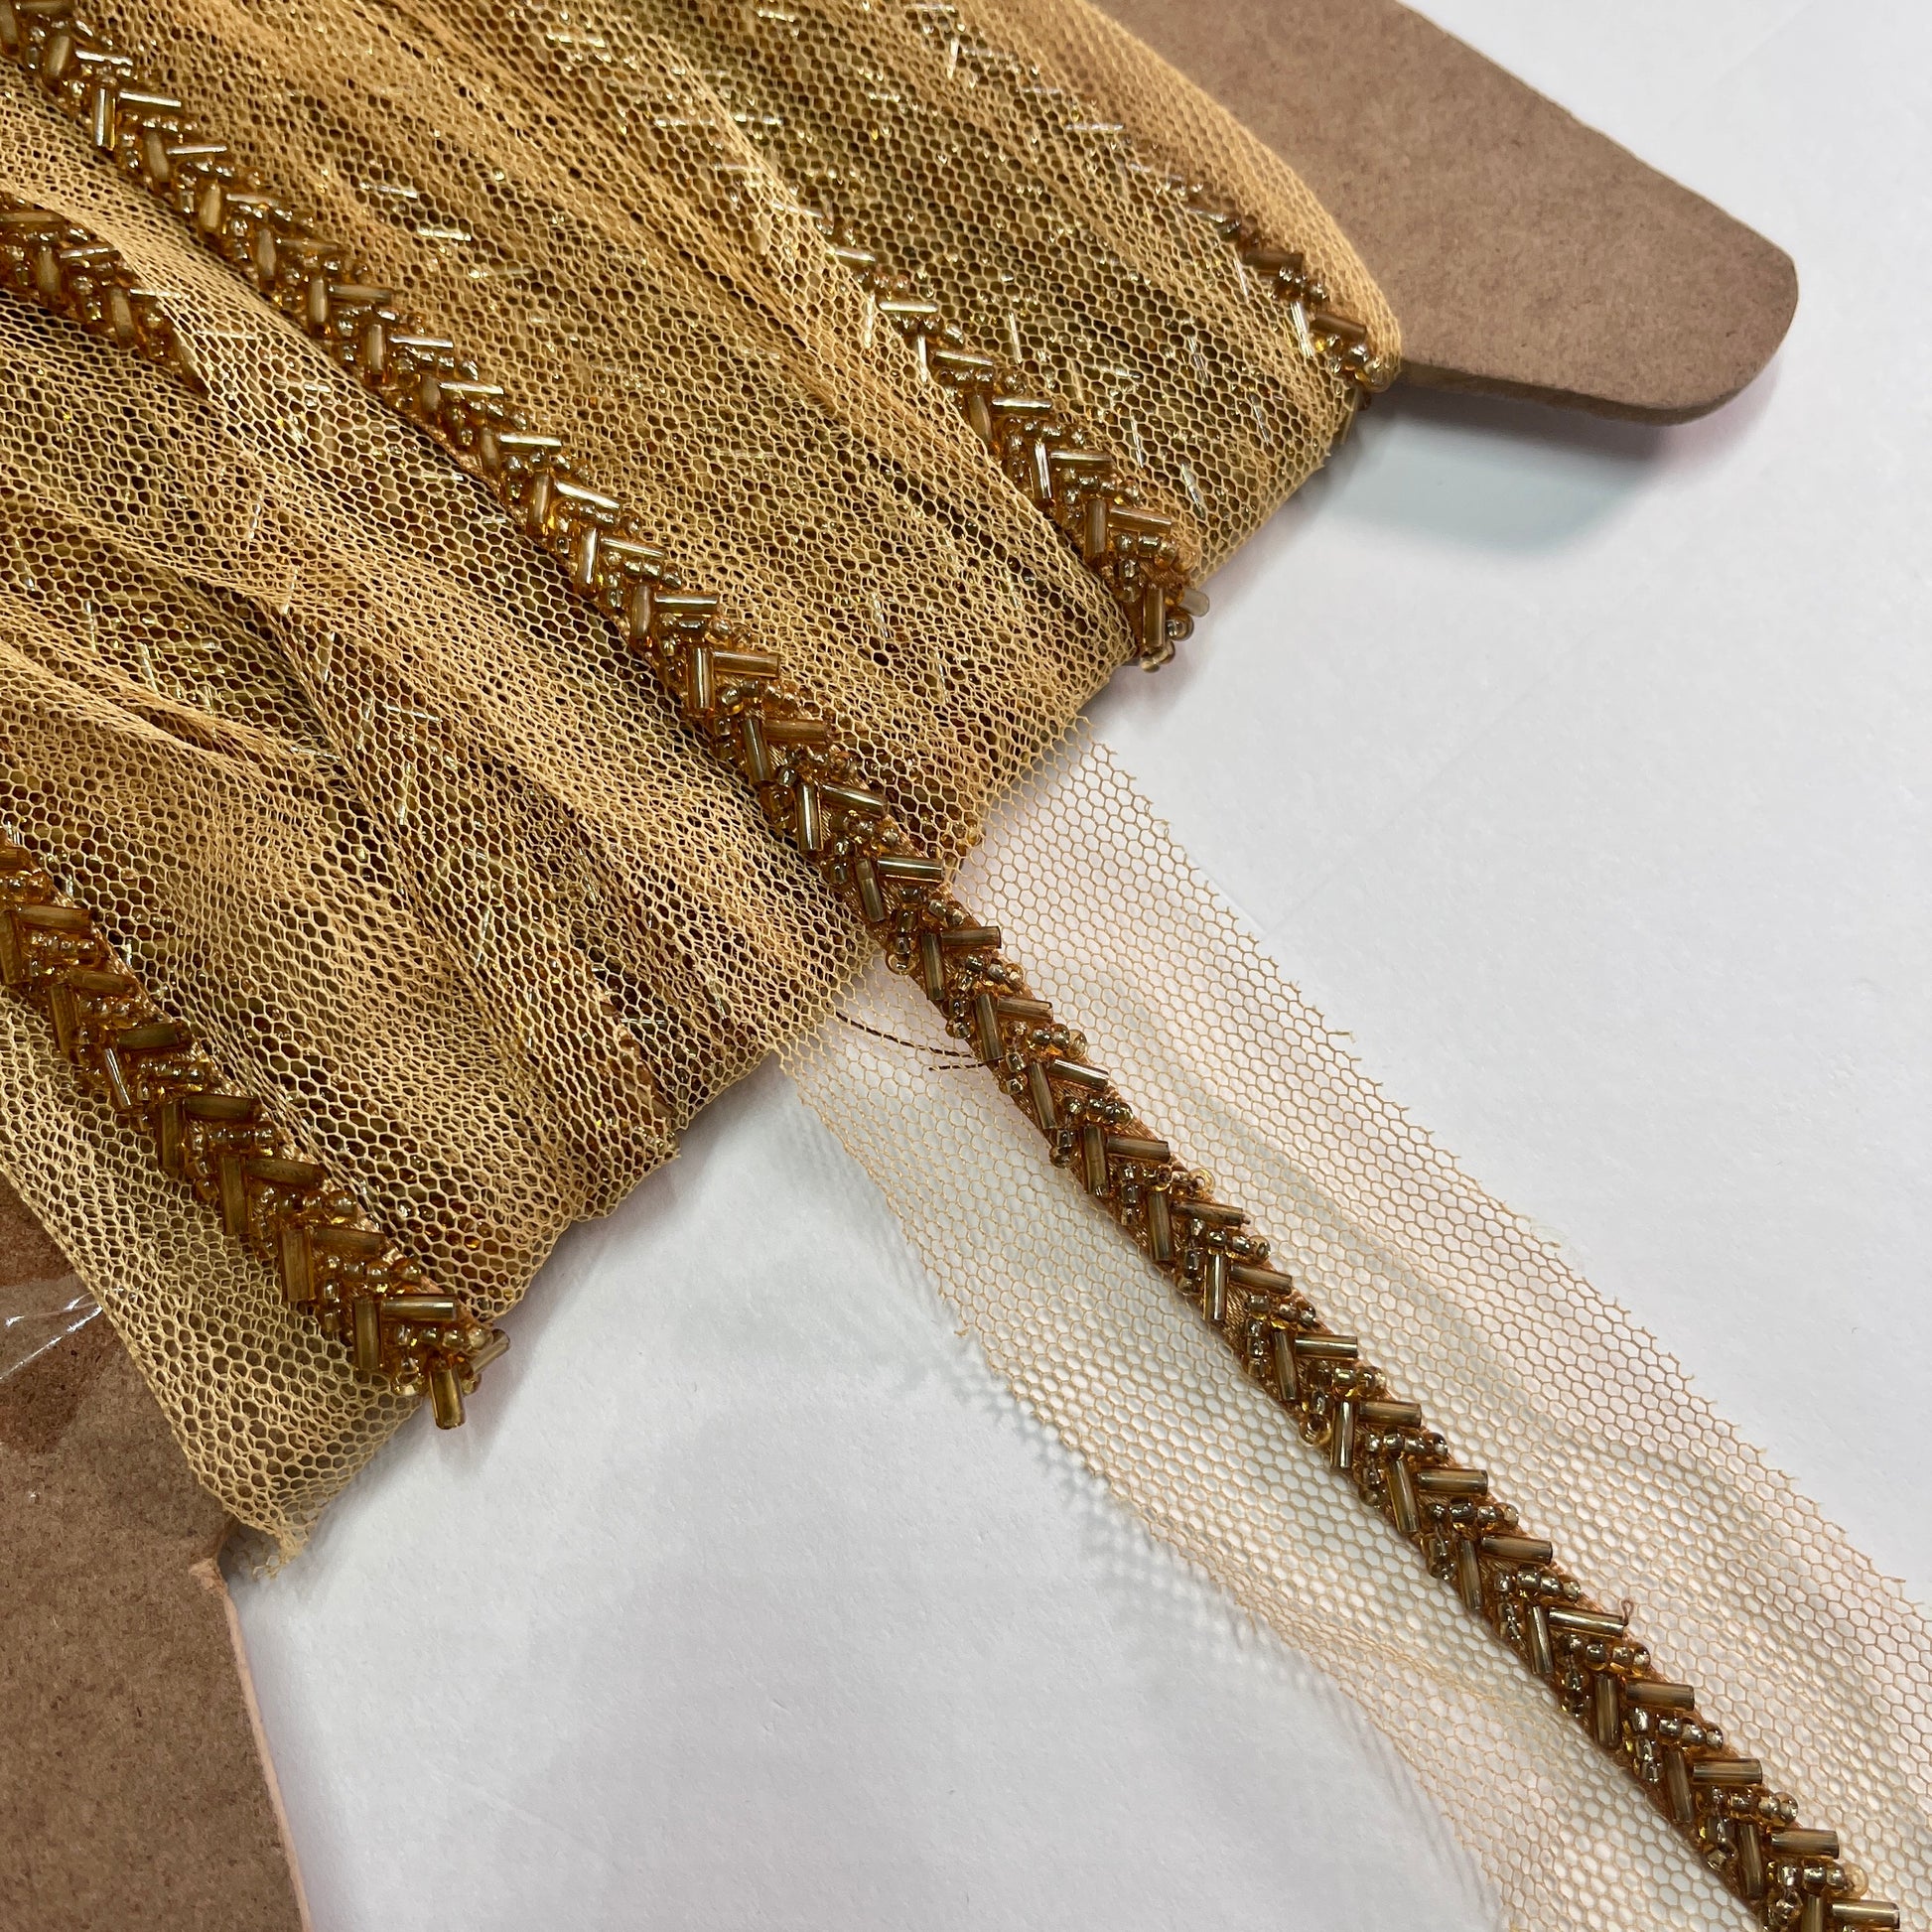 Beautiful bugle bead trim, hand beaded on a tulle netting. Popular for bridal wear, evening wear, crafts, jewellery and headband making.